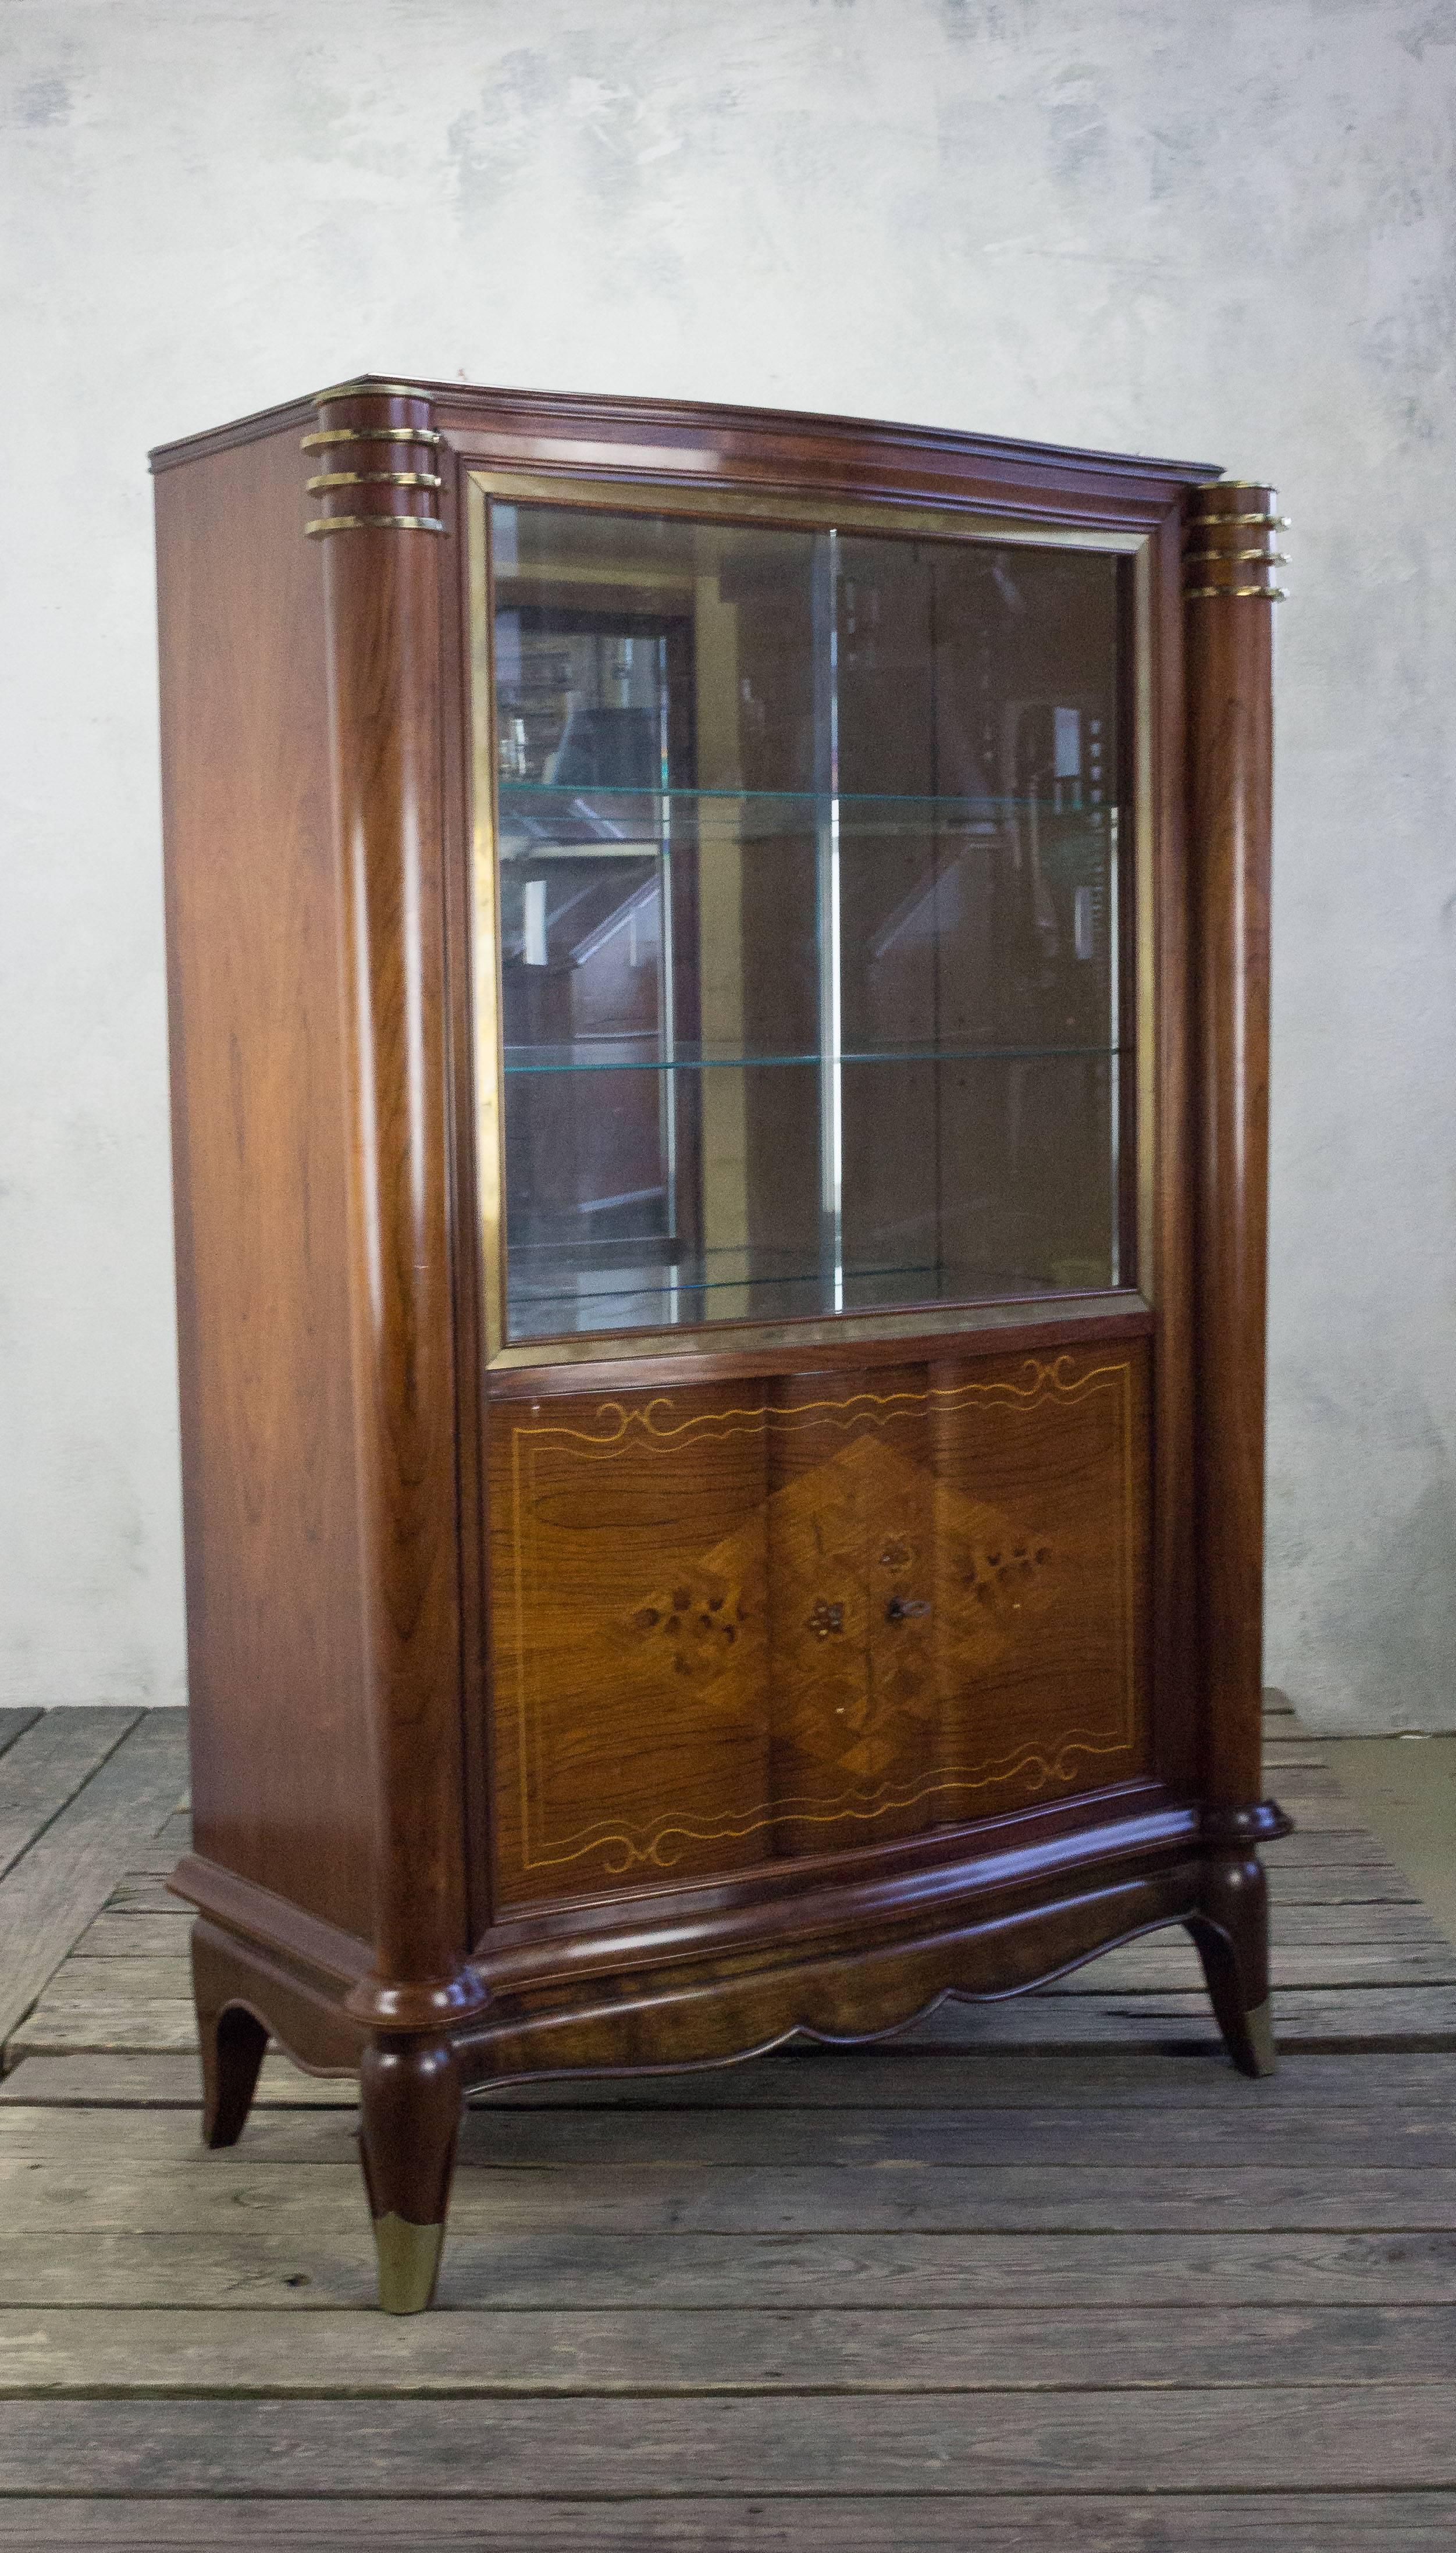 This French Rosewood display cabinet with inlays and brass sabot feet hails from the 1940s and is a true masterpiece of design in the style of Jules Leleu. The sliding glass doors elegantly protect the mirrored bottom and glass shelves, giving